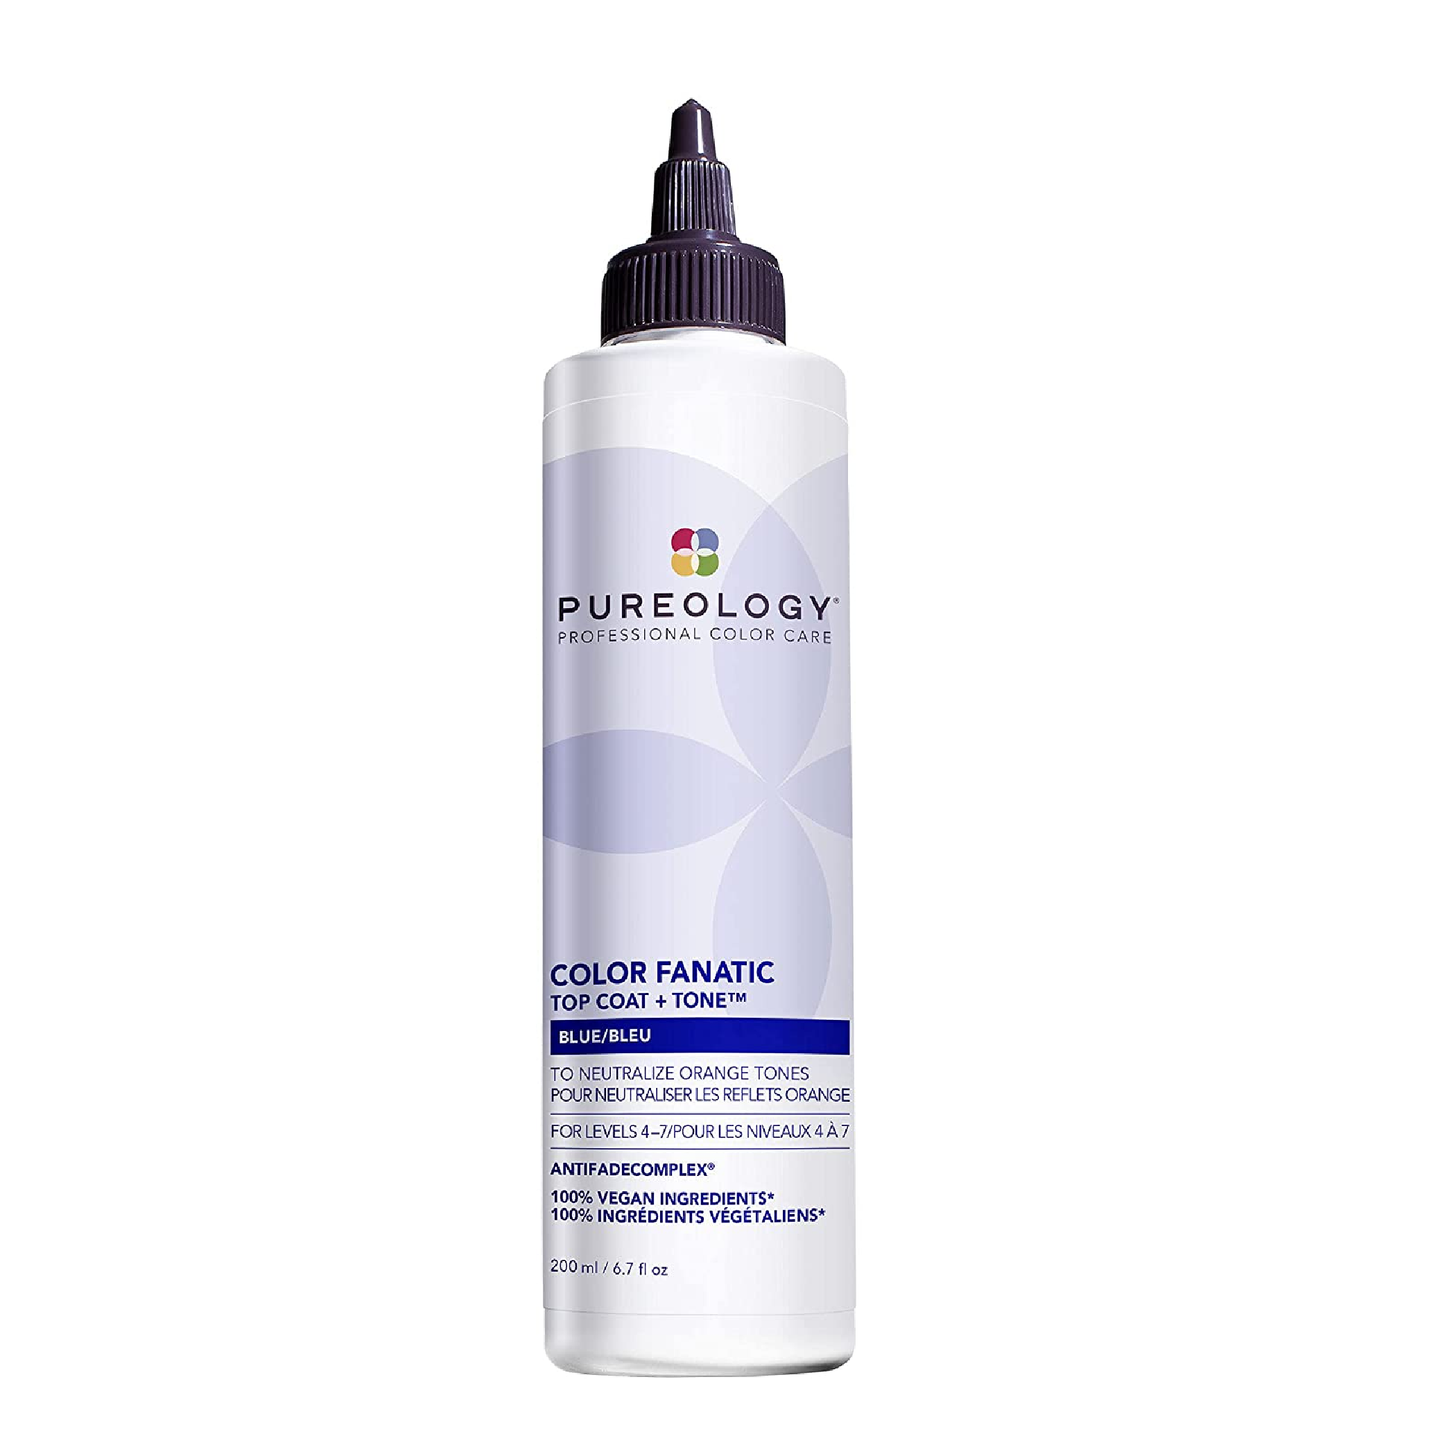 Pureology Color Fanatic Top Coat and Tone Blue 250ml